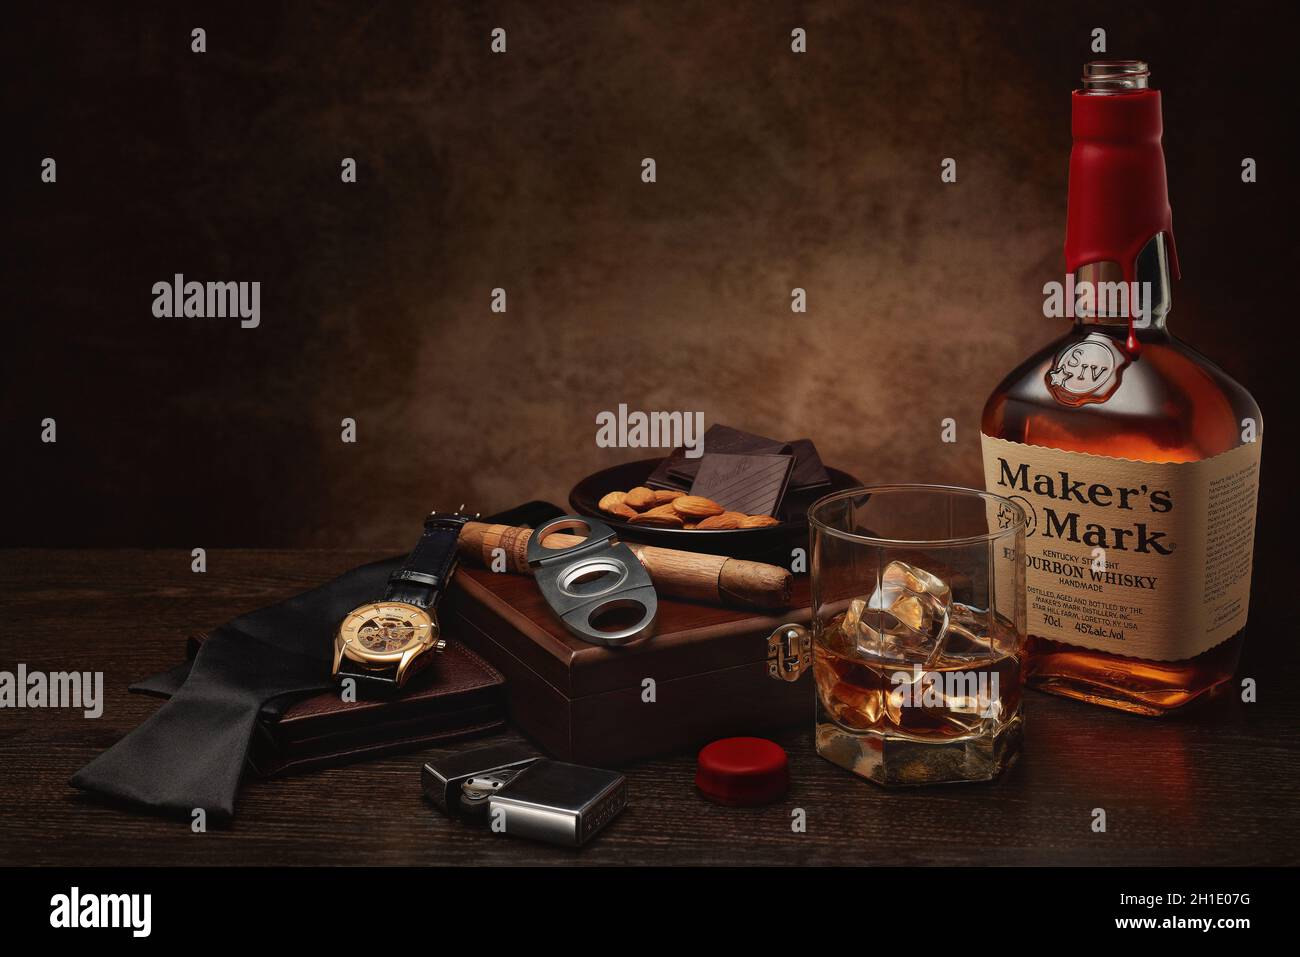 St.Petersburg, Russia - March 2020 - Still life with bottle of Maker's Mark kentucky straight bourbon whisky, glass, box with cigar, nuts and chocolat Stock Photo